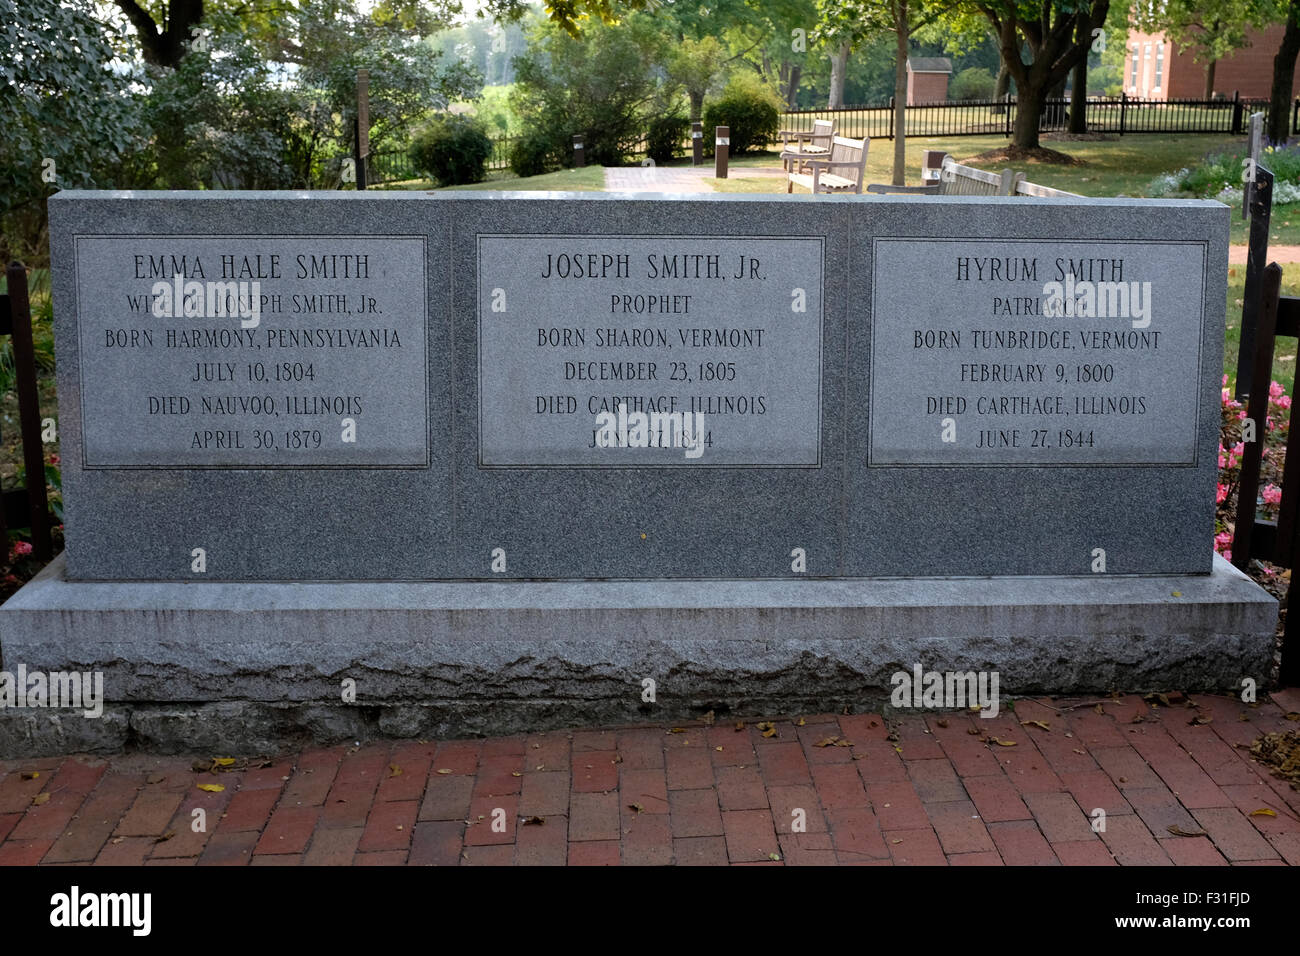 Graves of Joseph Smith, Jr., Emma Hale Smith and Hyrum Smith in Nauvoo, Illinois Stock Photo